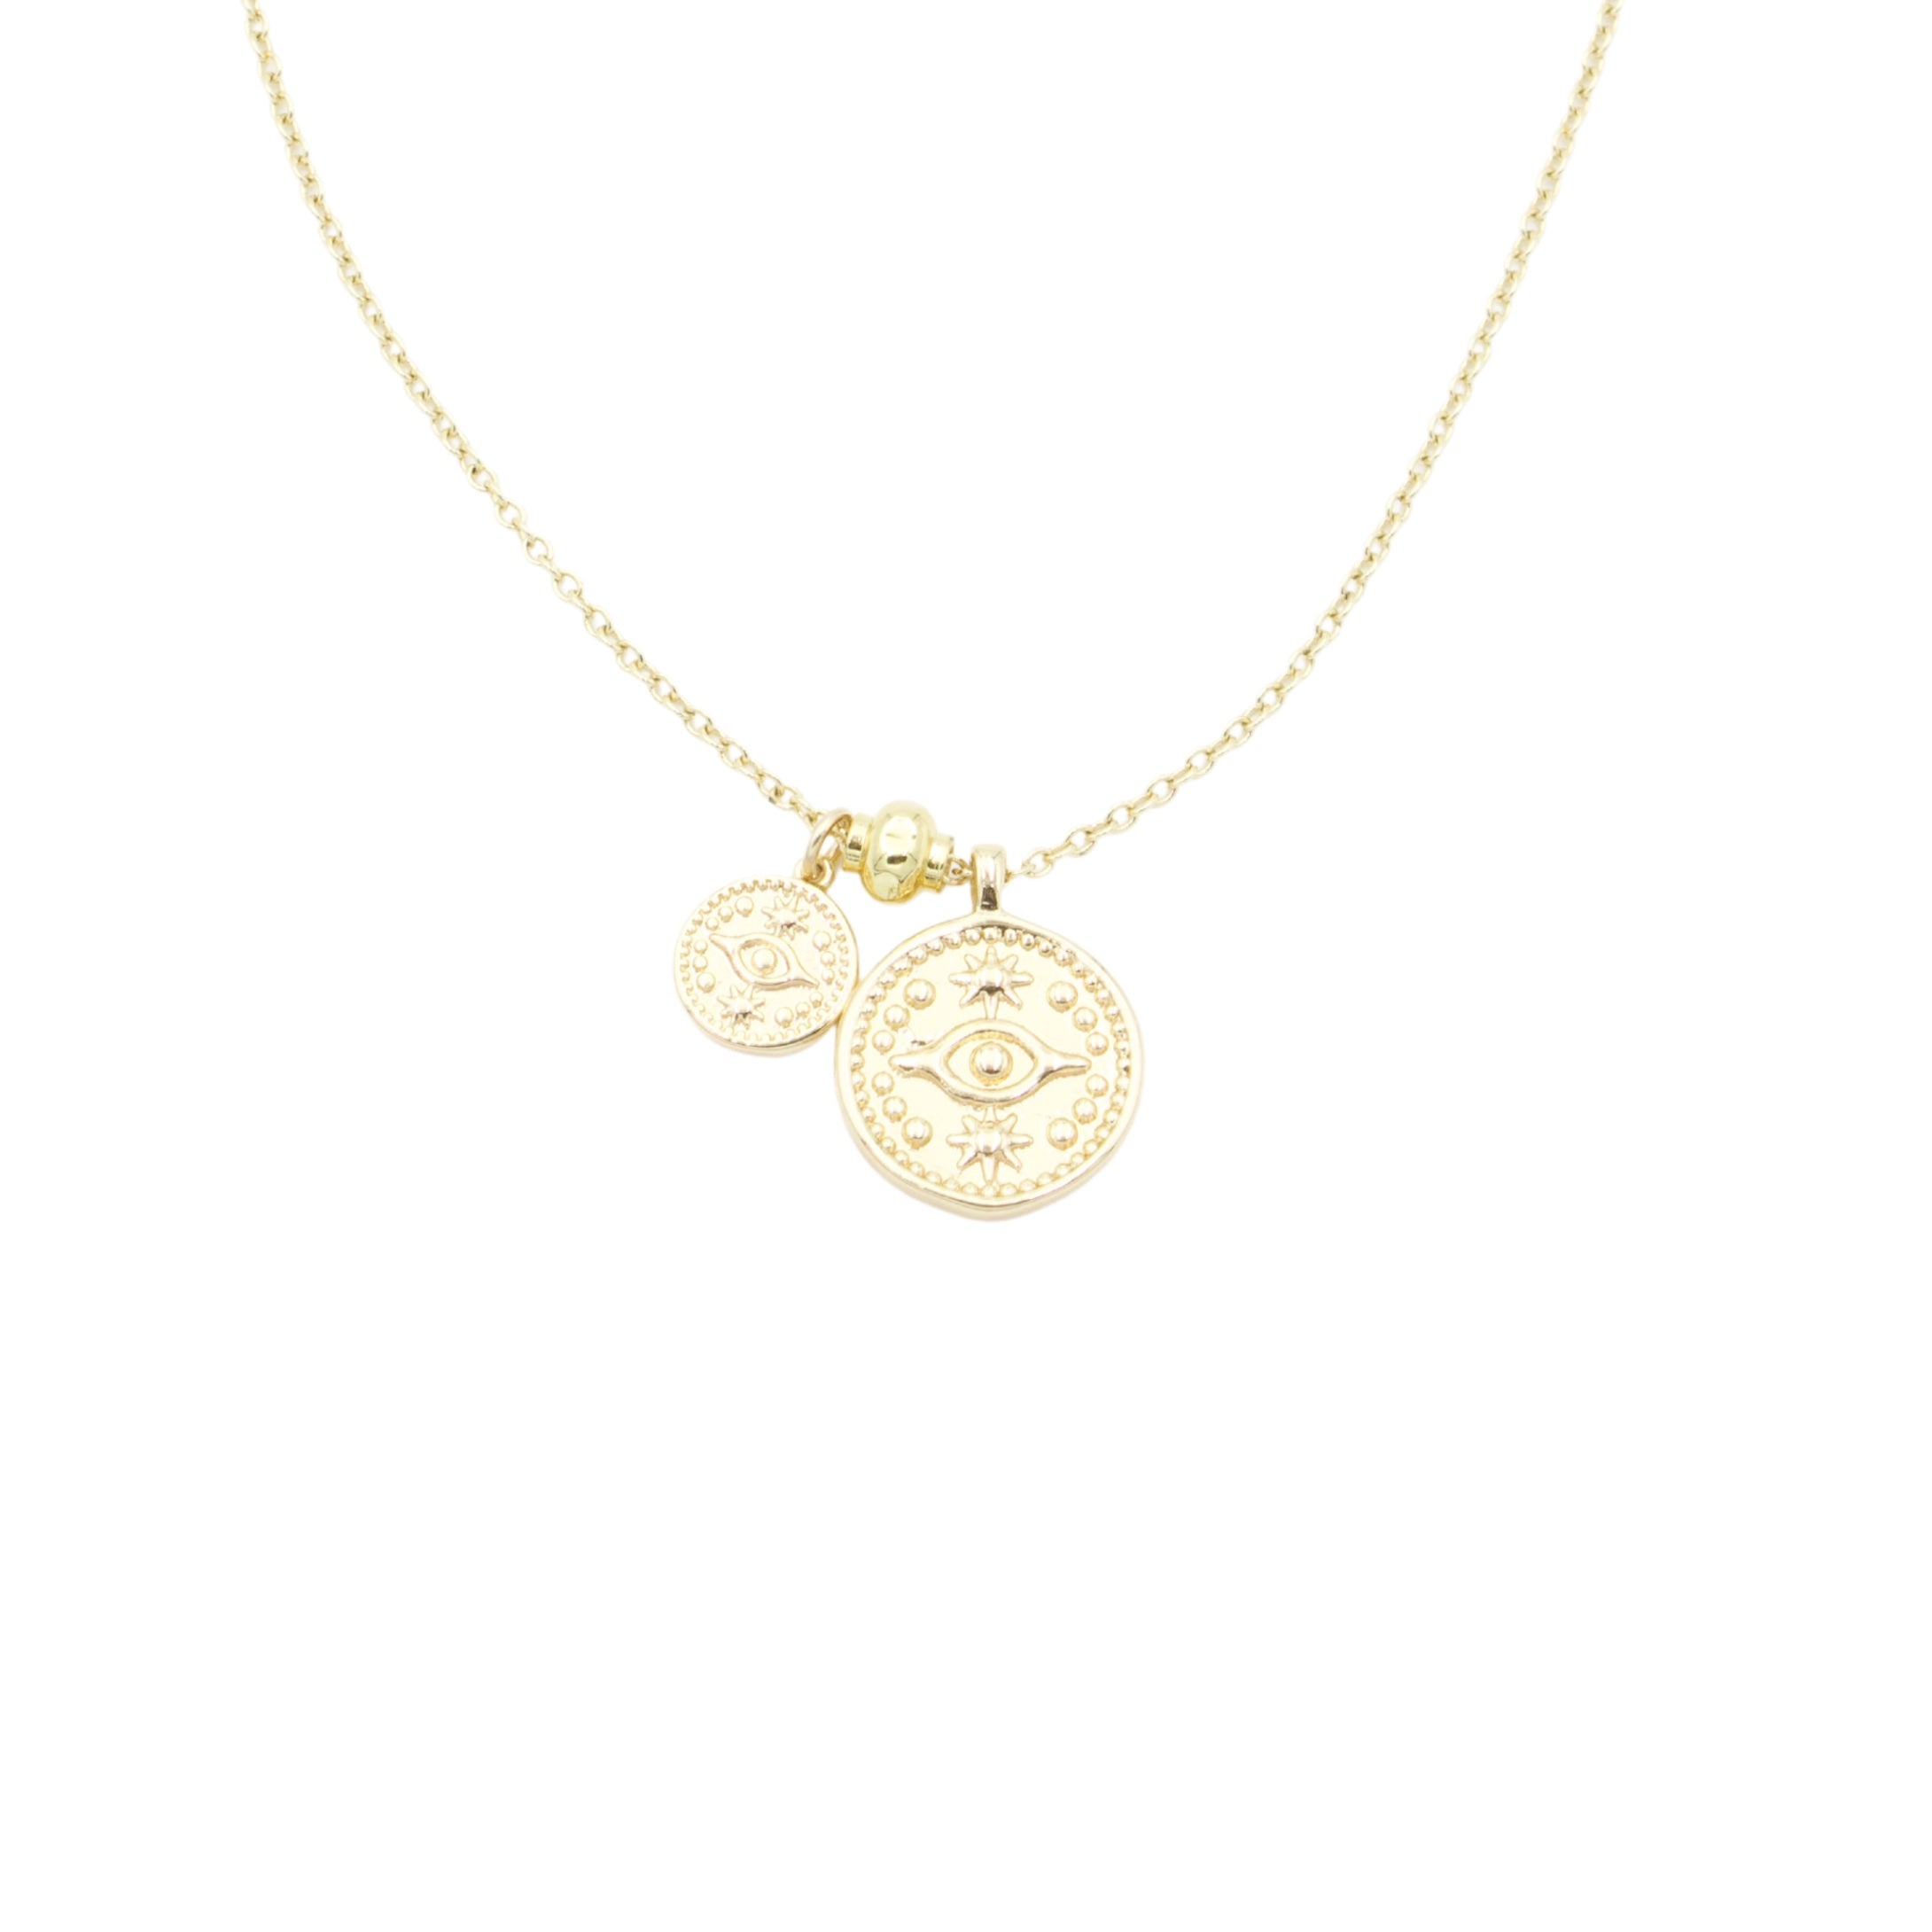 AW Boutique's gold filled 18 inch dainty necklace chain with a large Evil Eye coin and a mini Evil Eye coin charm pendant. Part of Protection collection. Gold filled jewellery.  Edit alt text